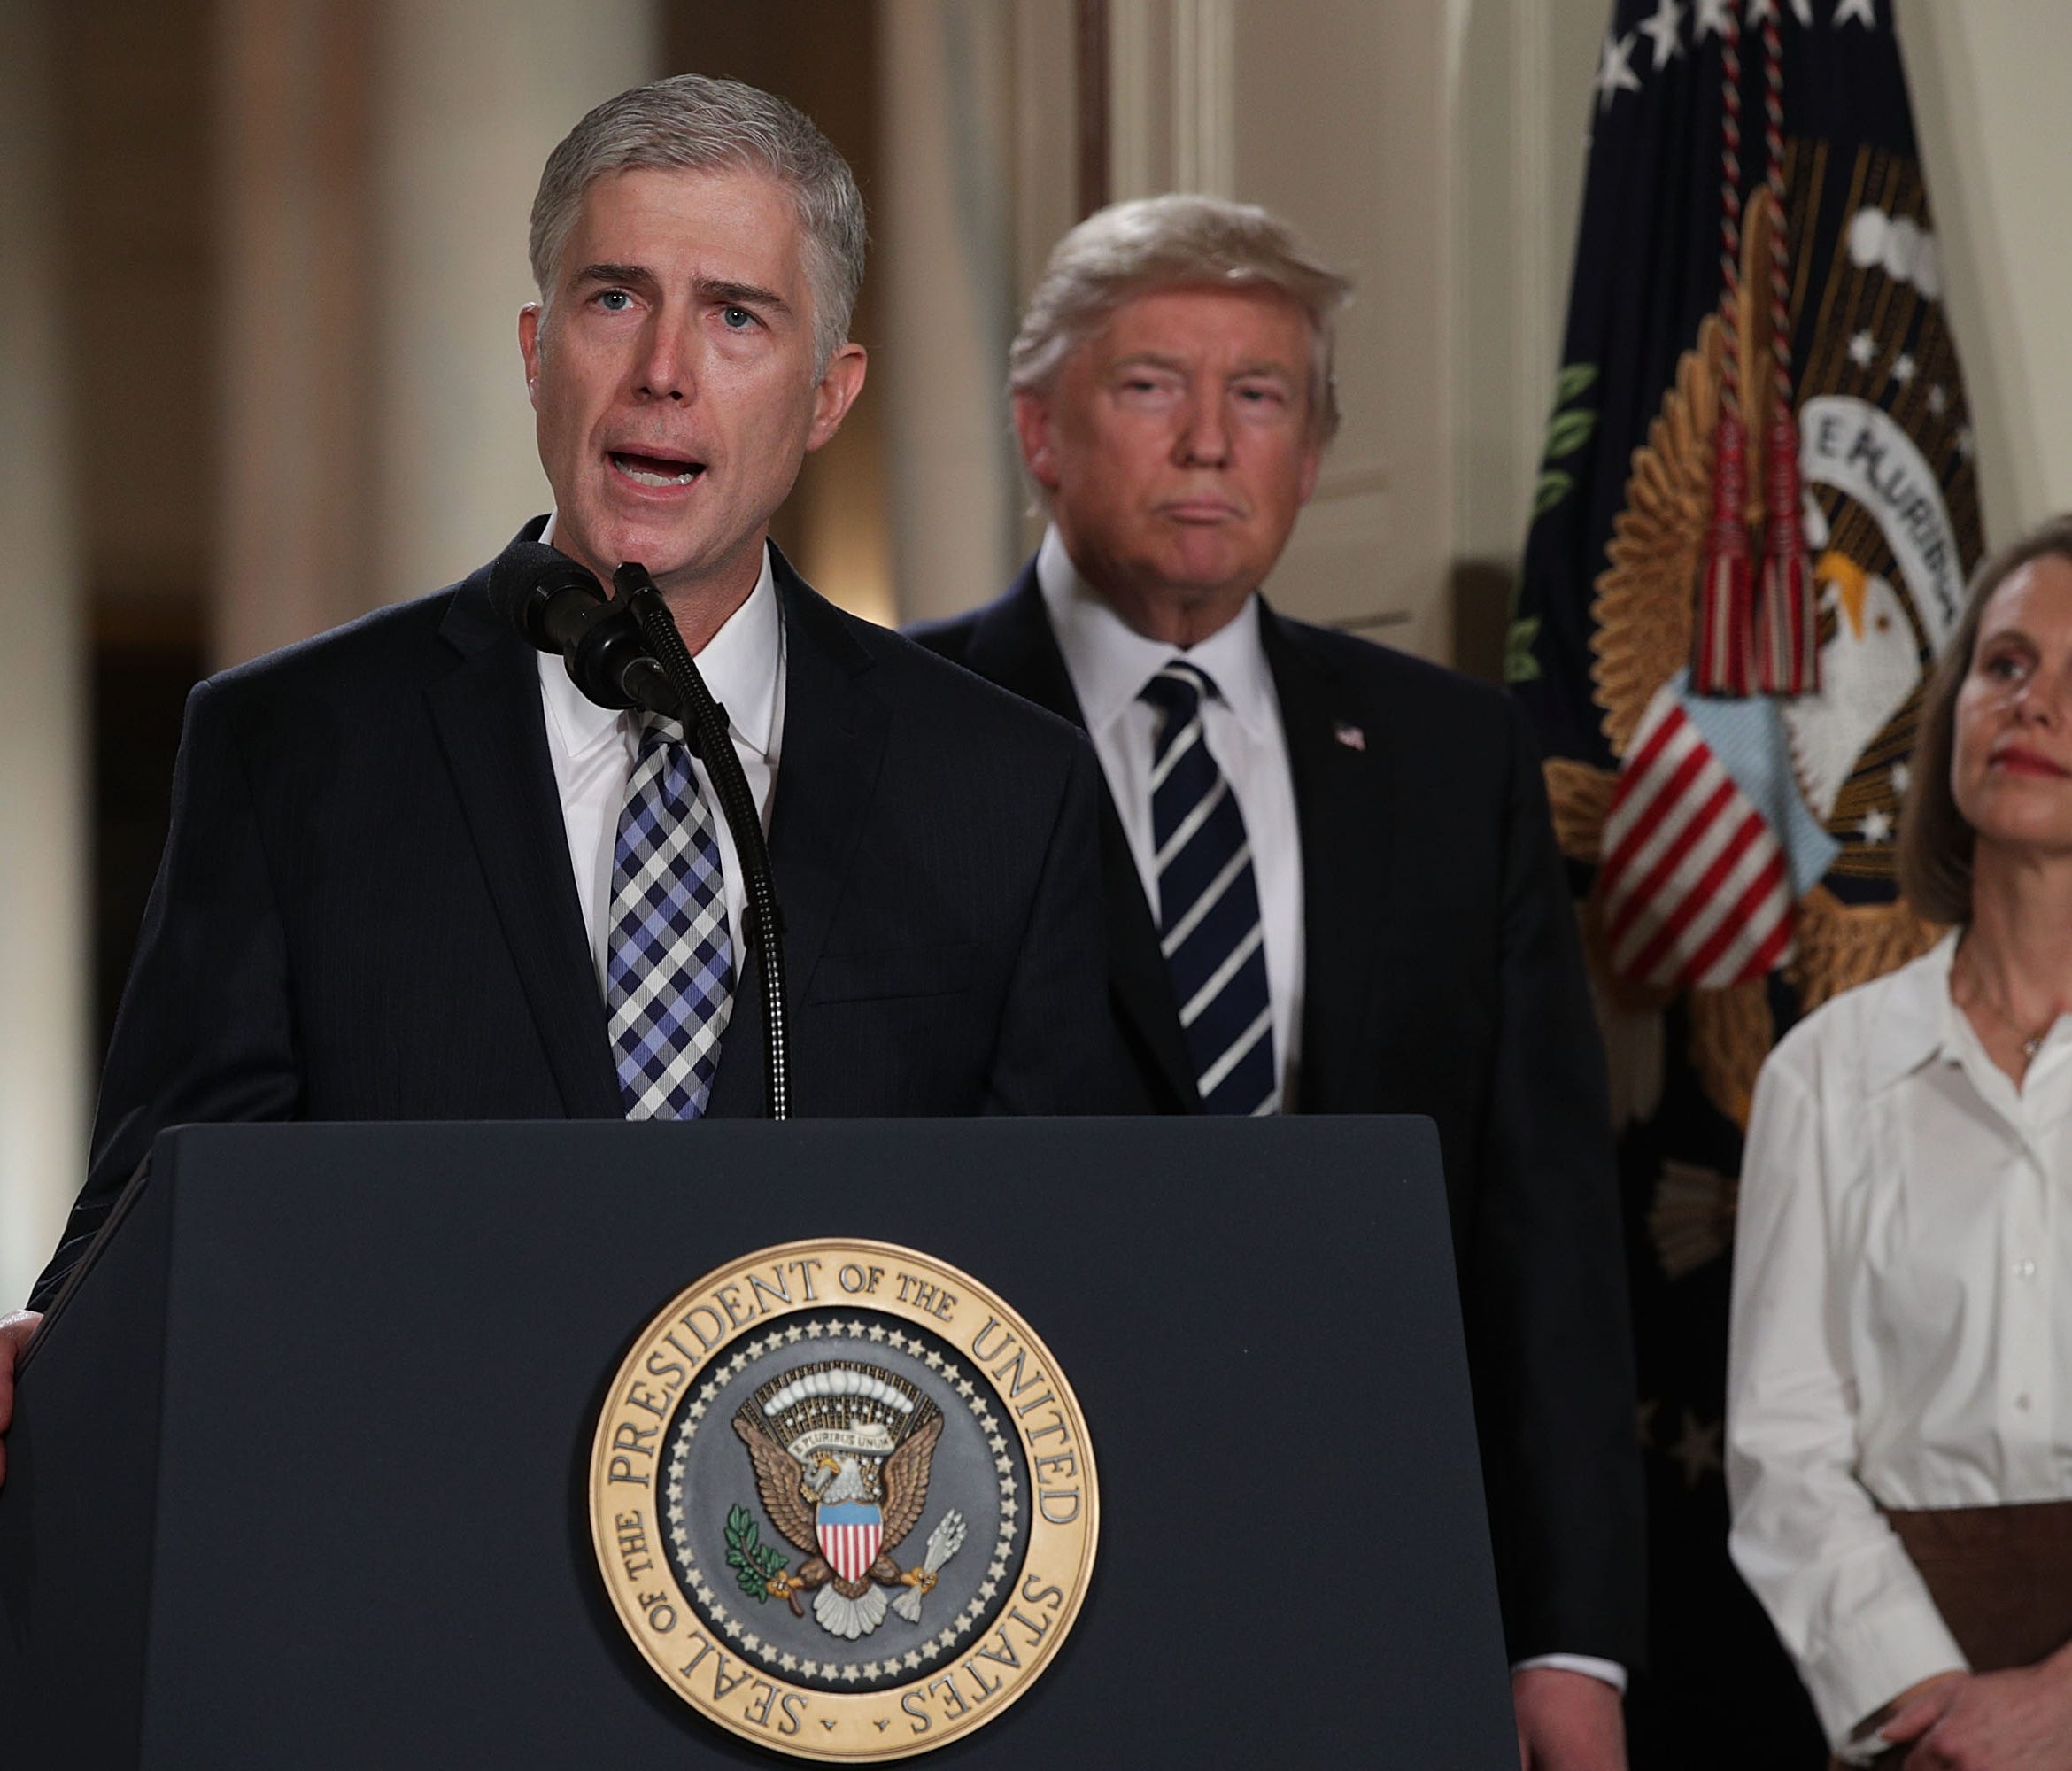 Judge Neil Gorsuch speaks to the crowd as his wife, Louise, looks on after President Trump nominated him to the Supreme Court during a ceremony in the East Room of the White House on Jan. 31, 2017.